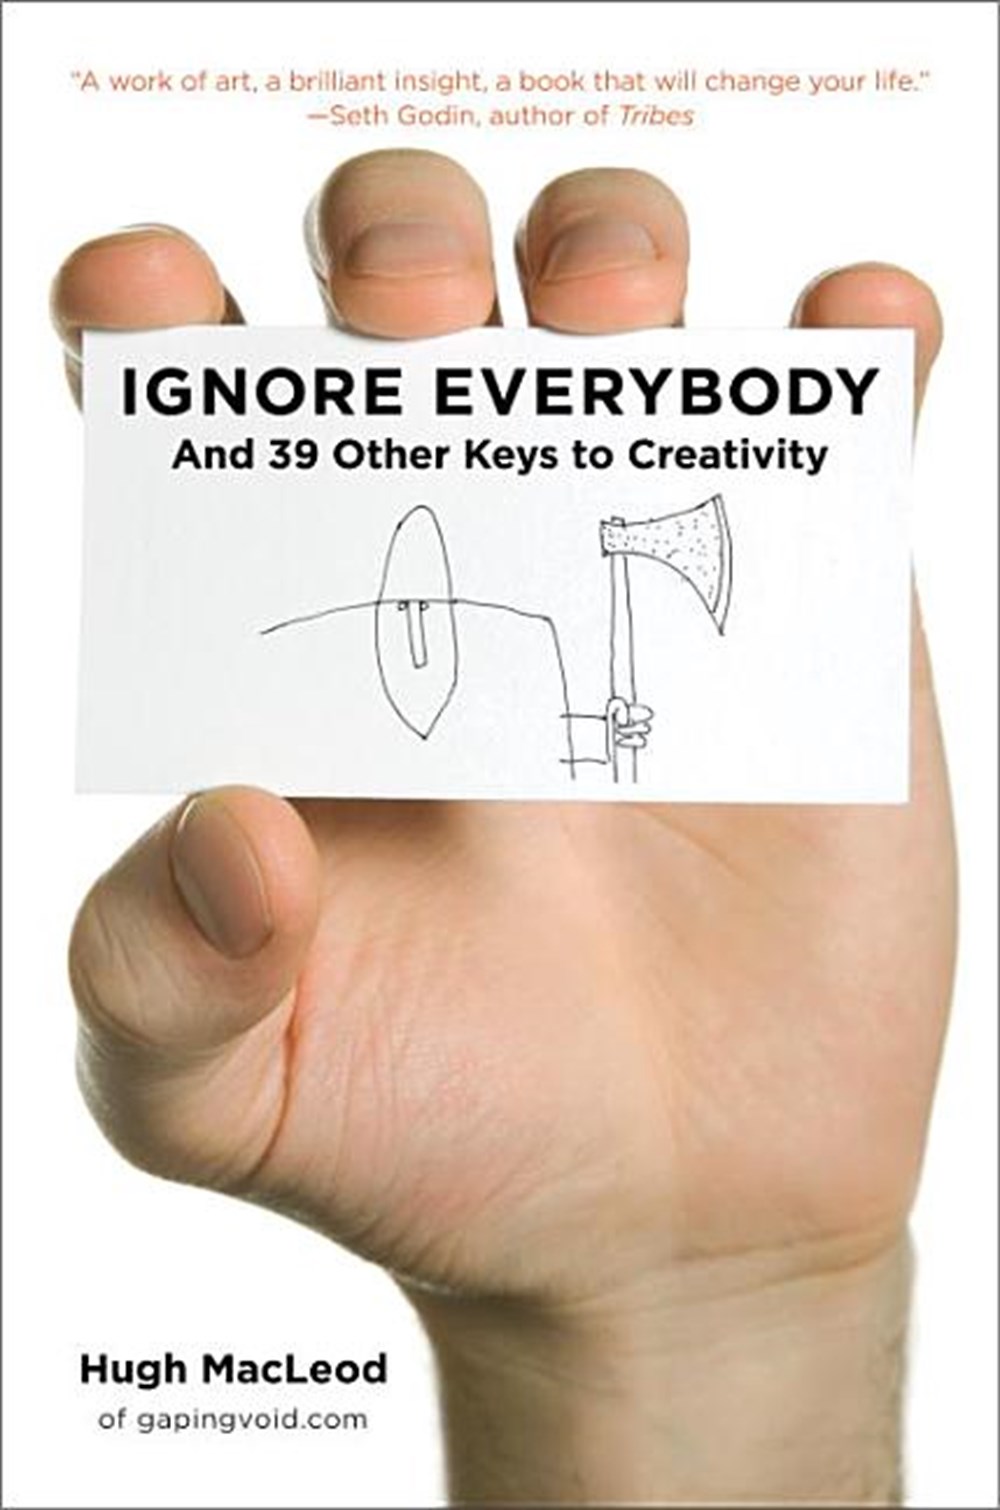 Ignore Everybody And 39 Other Keys to Creativity